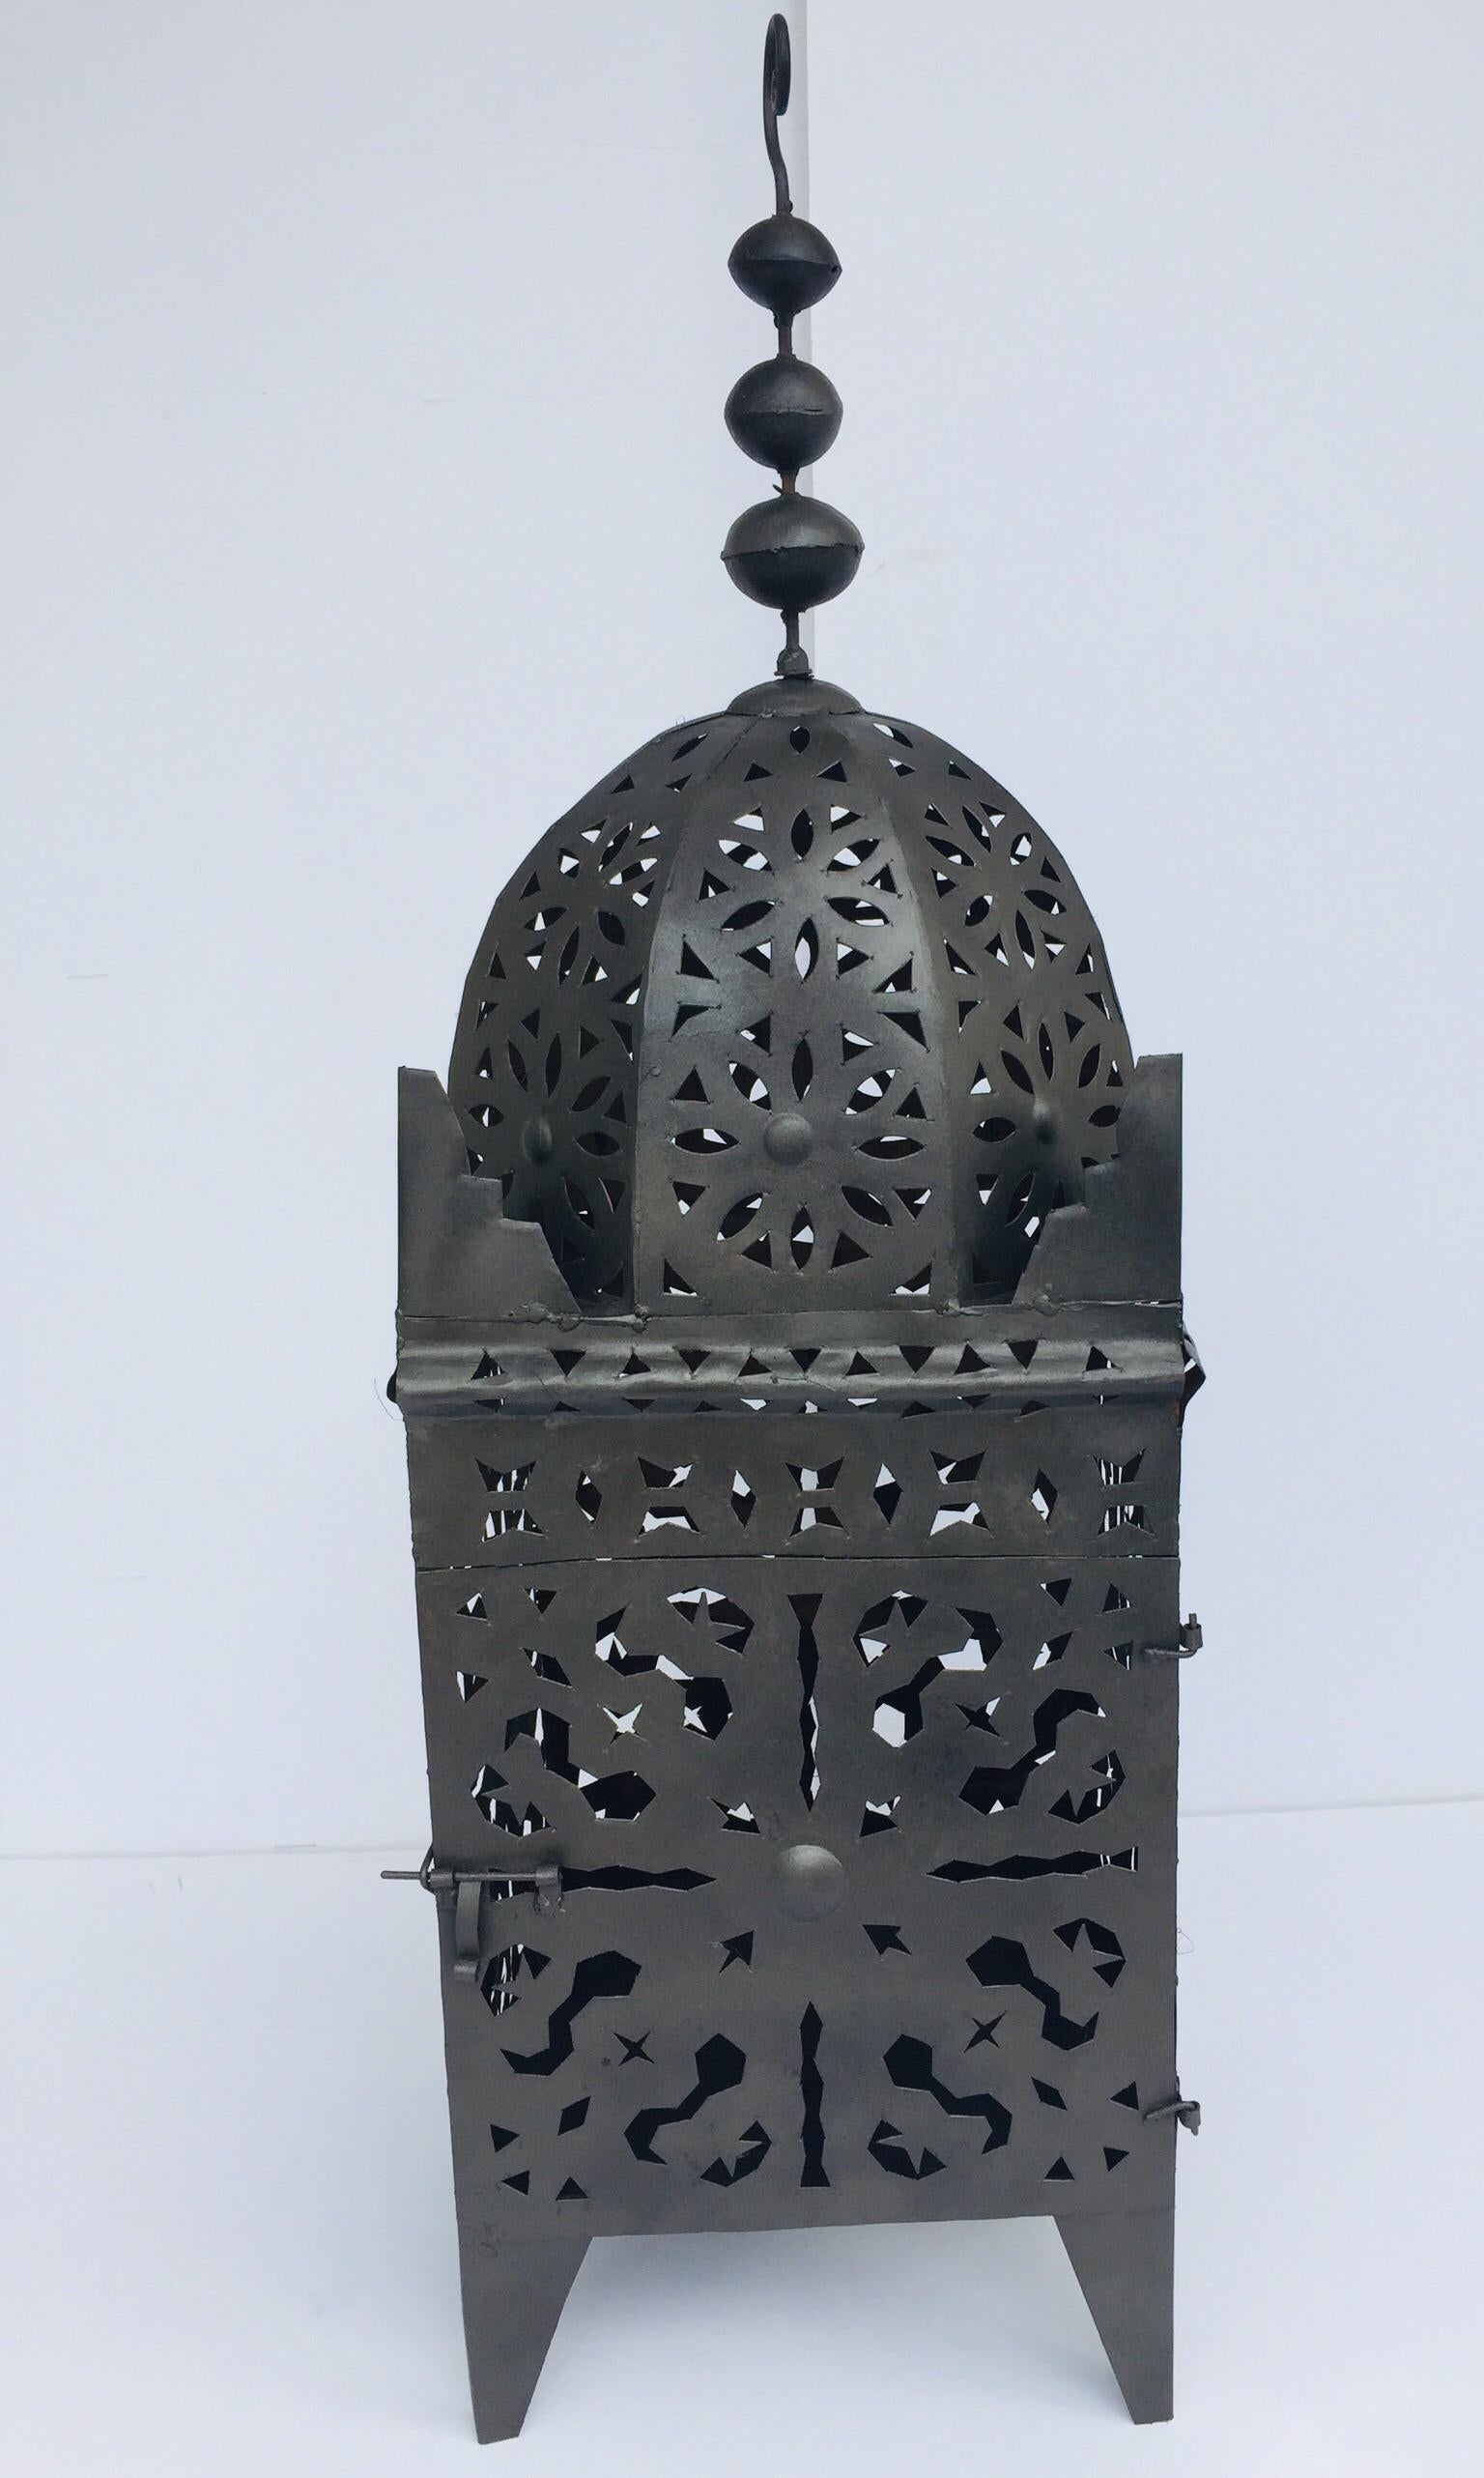 Moroccan Moorish metal candle lantern.
Hurricane candle lamp handcrafted in Morocco by artisans, metal hand-cut openwork and hammered with Moorish designs, open in front for use with pillar candles.
The lantern has a small door to access the